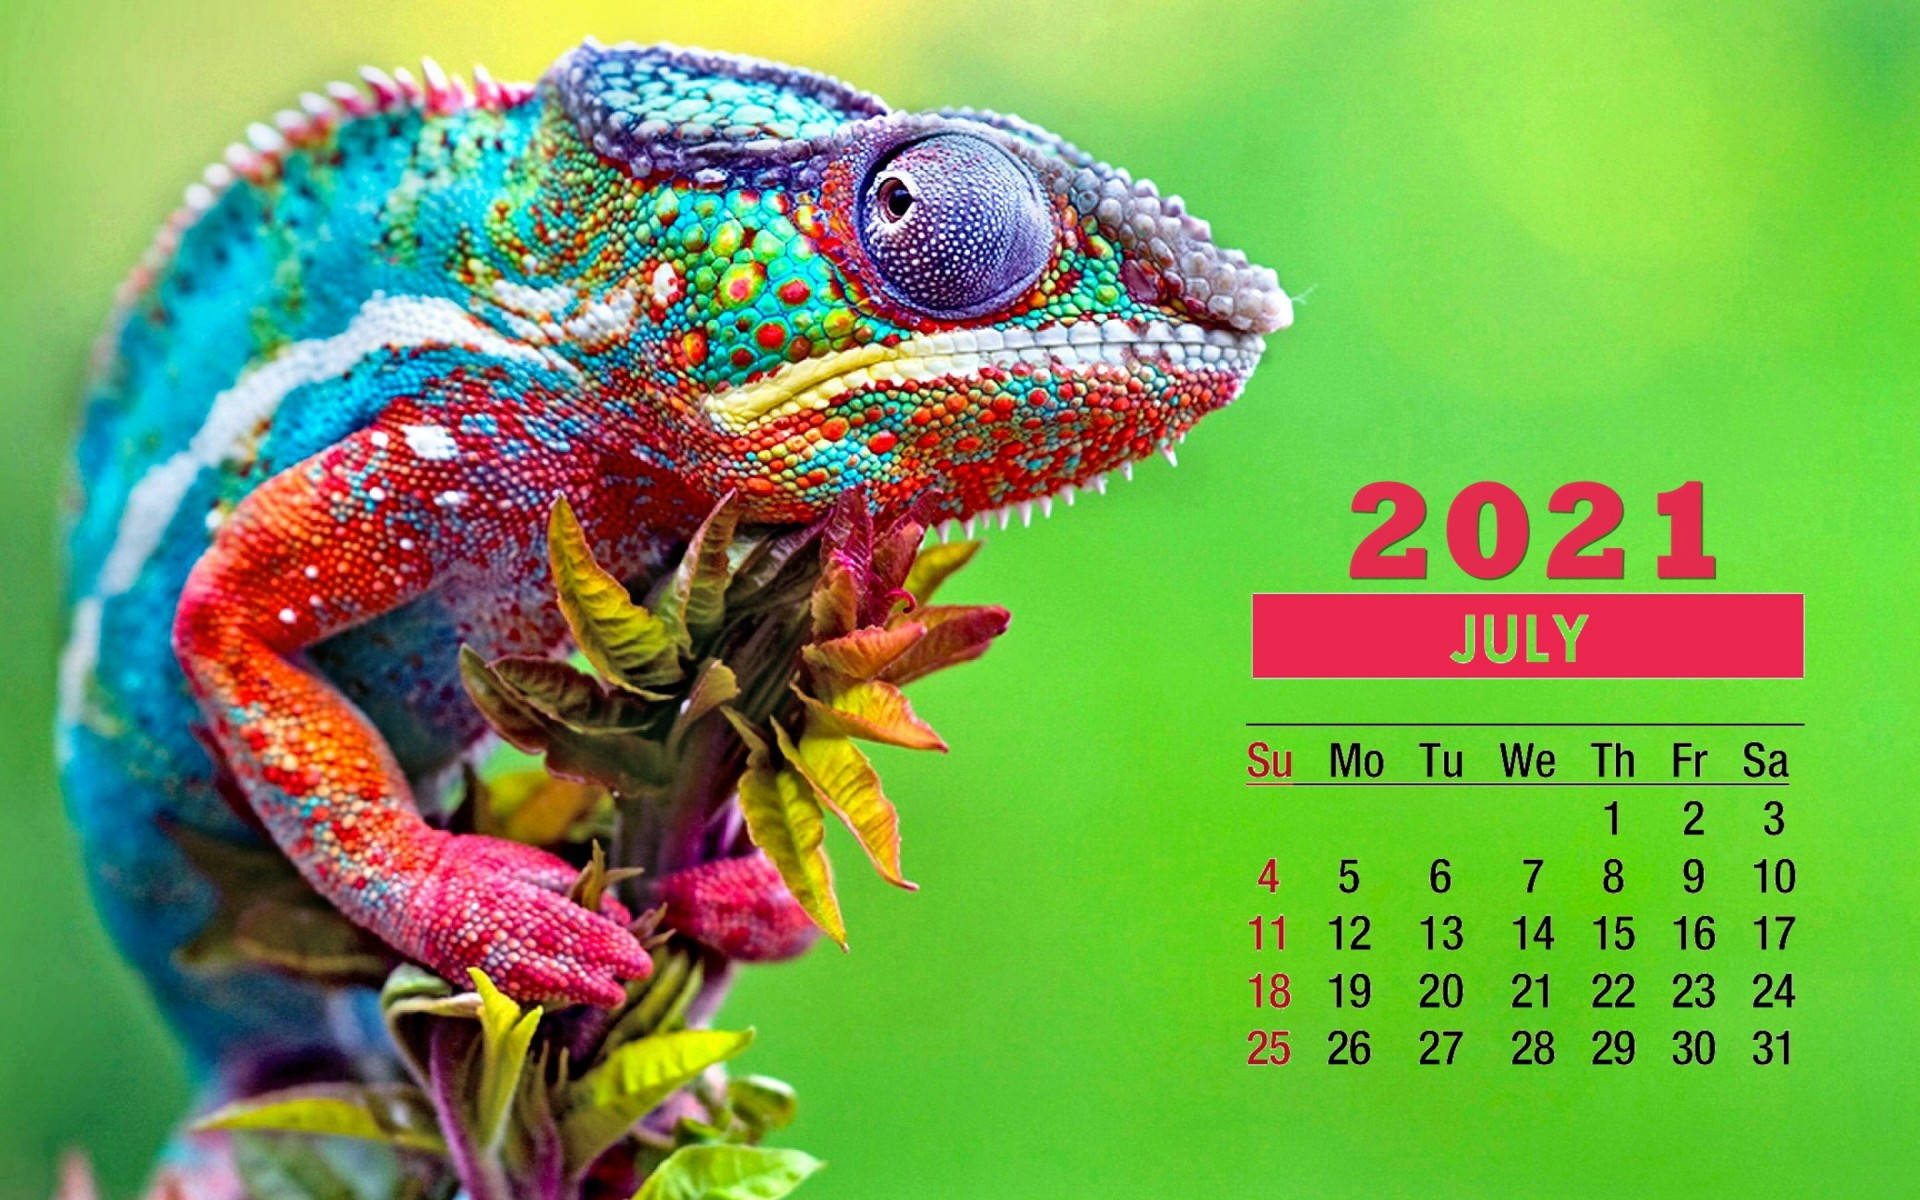 Welcome to July with the Colorful Chameleon 2021 Calendar! Wallpaper